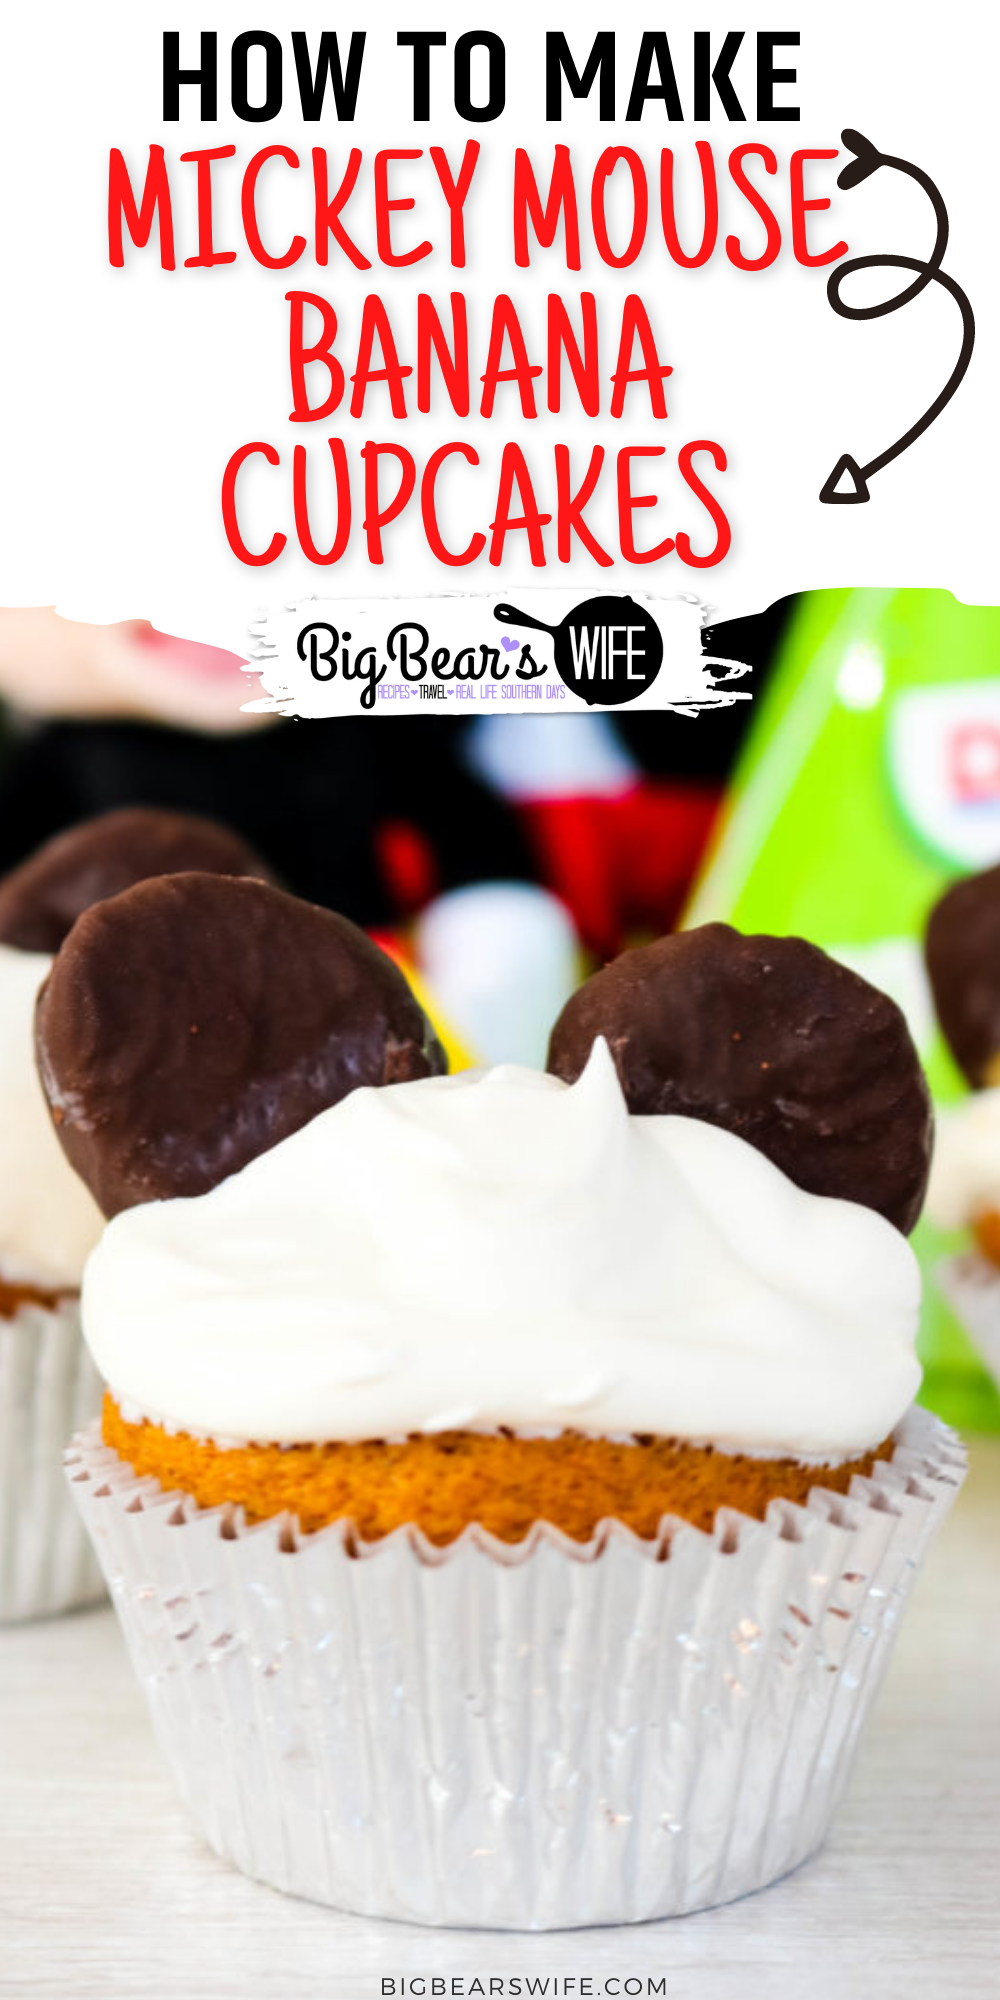 Mickey Mouse is turning 90 and it's time to celebrate his birthday with these Mickey Mouse Birthday Banana Cupcakes  #Mickey90 #MickeyTrueOriginal #Disney #Dole #DoleHero via @bigbearswife